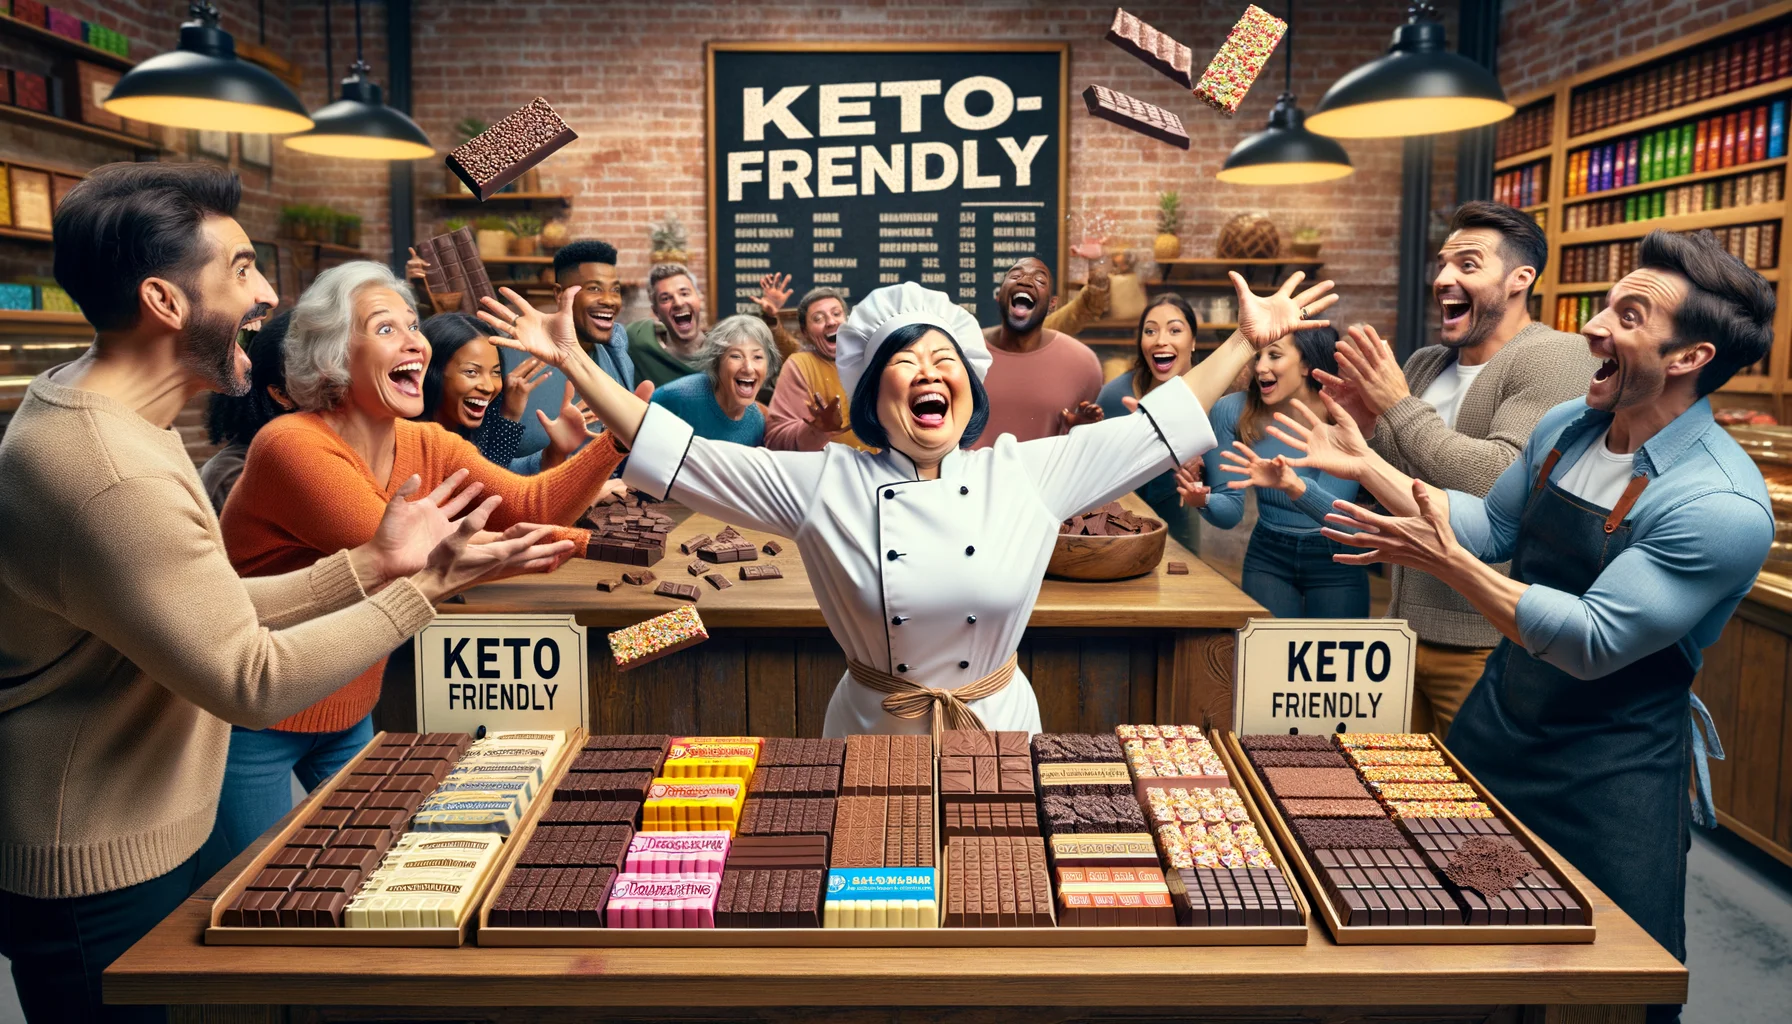 This is the perfect picture of a ludicrous, high-humor scenario embodying the 'Keto-Friendly Chocolate Bars'. A middle-aged Asian woman in a chef's outfit is jubilantly tossing chocolate bars in the air next to a wide display counter full of variously crafted keto chocolate bars, each with bold, colorful labels emphasizing 'Keto-Friendly' in colossal letters. In the background, patrons of varying ages, genders, and descents are excitedly reaching out for the bars, displaying a mix of satisfaction, joy, and surprise on their faces. The scene is taking place in a brightly lit, warm-tone specialty chocolate shop with polished wooden counters and rustic brick walls.